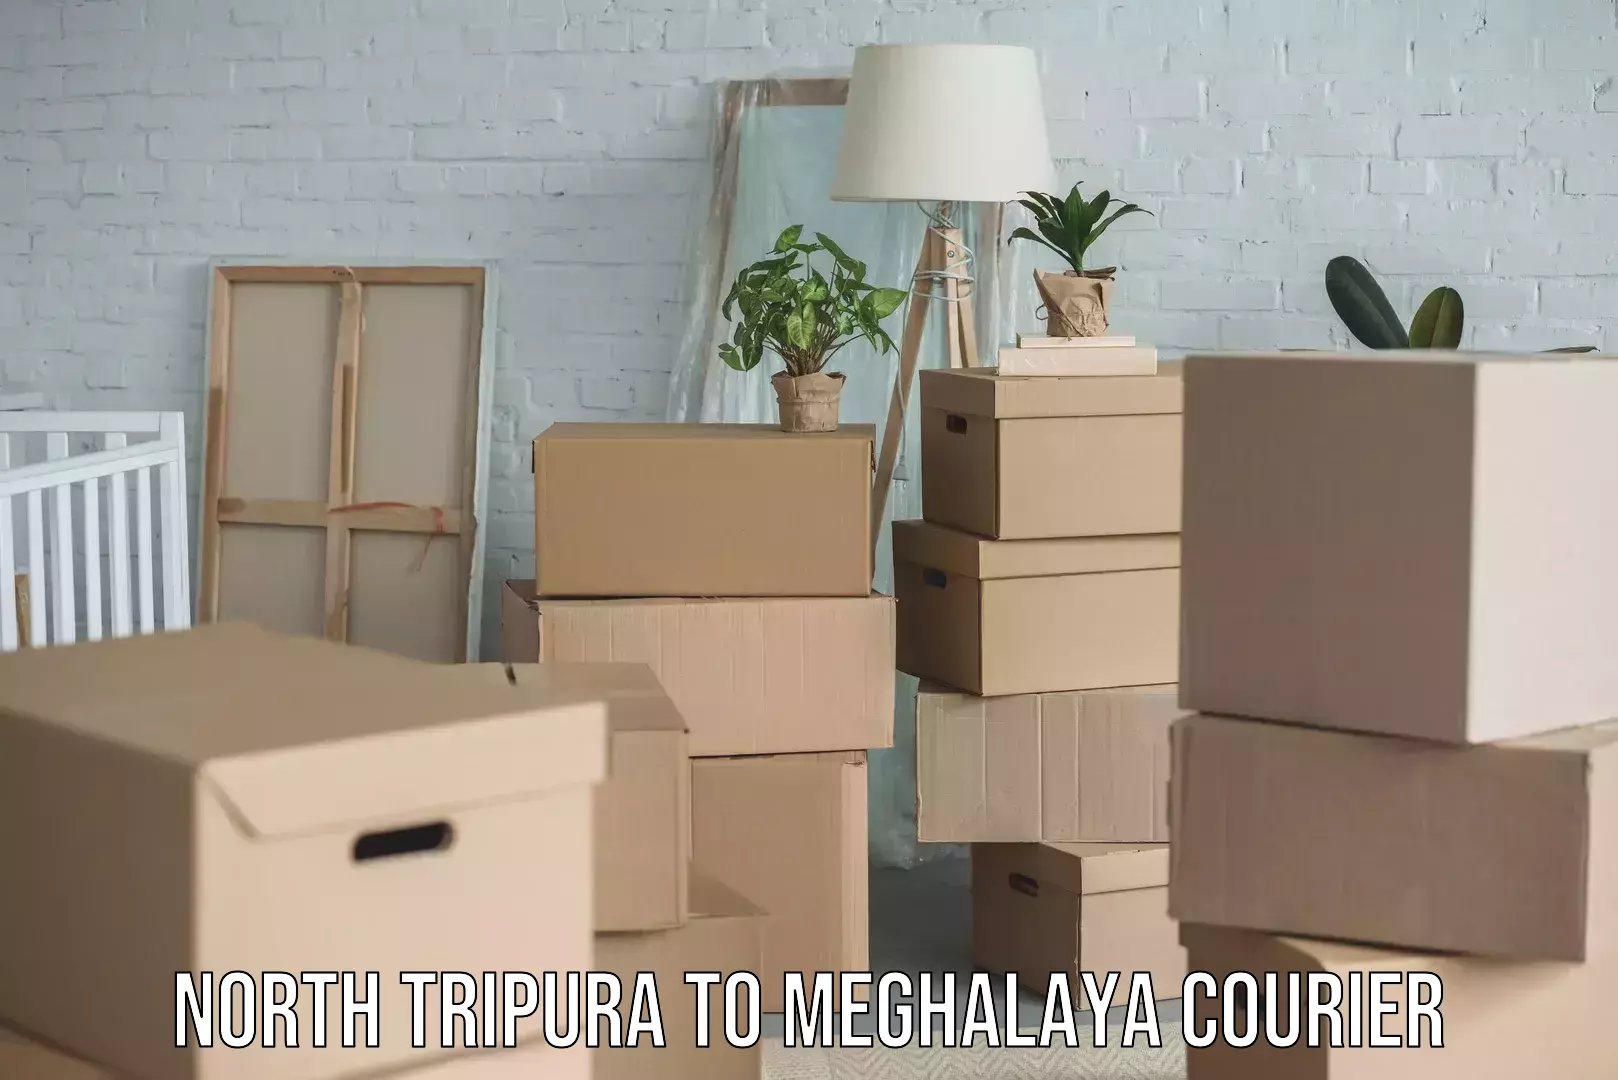 Reliable courier service North Tripura to Meghalaya